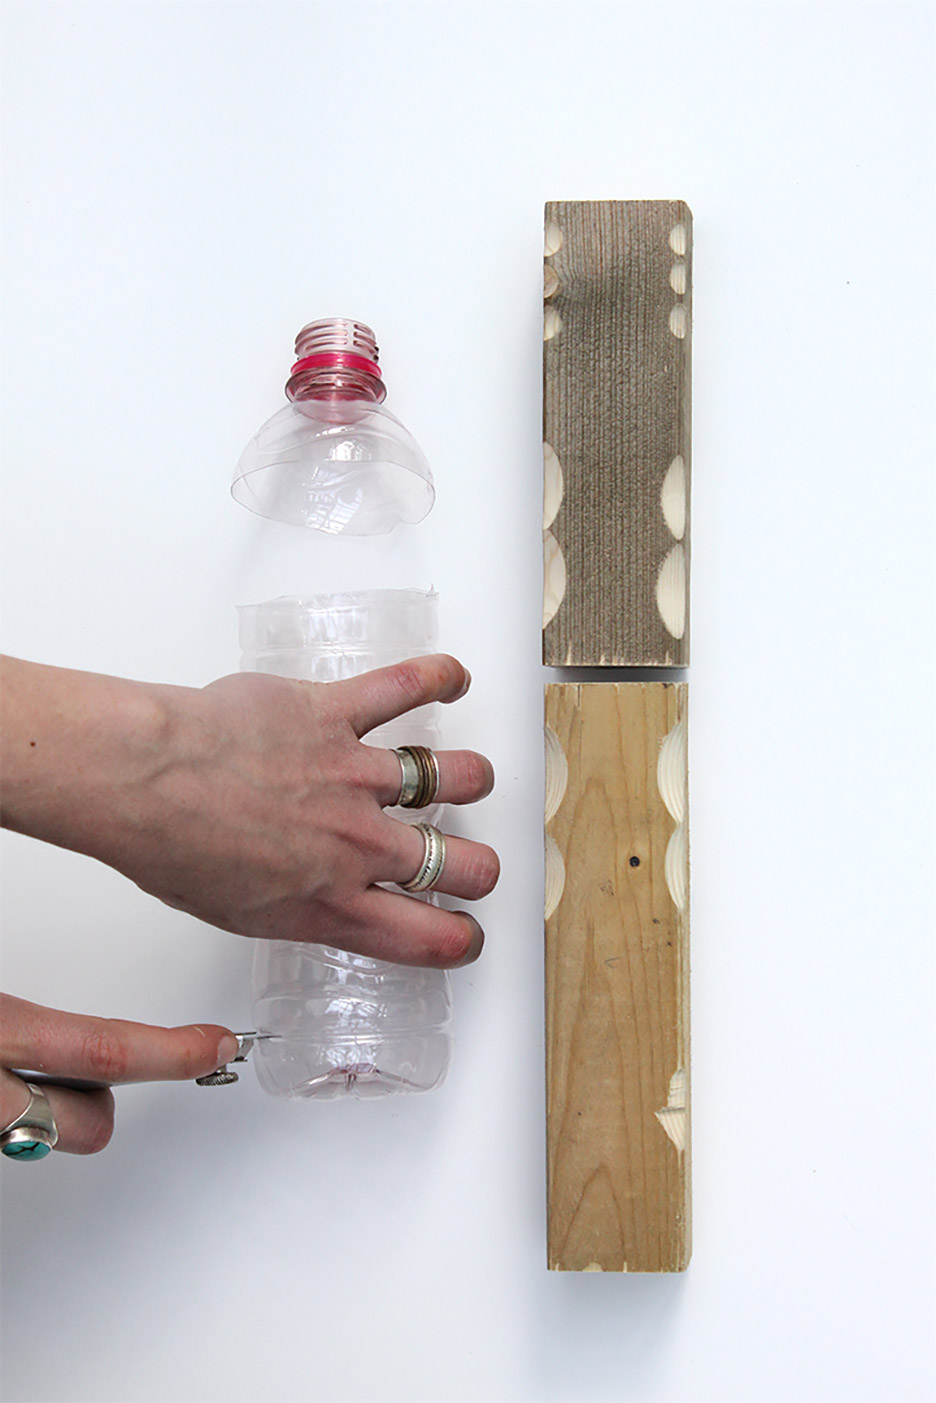 Micaella Pedro's bottle joining at RCA graduate show 2016